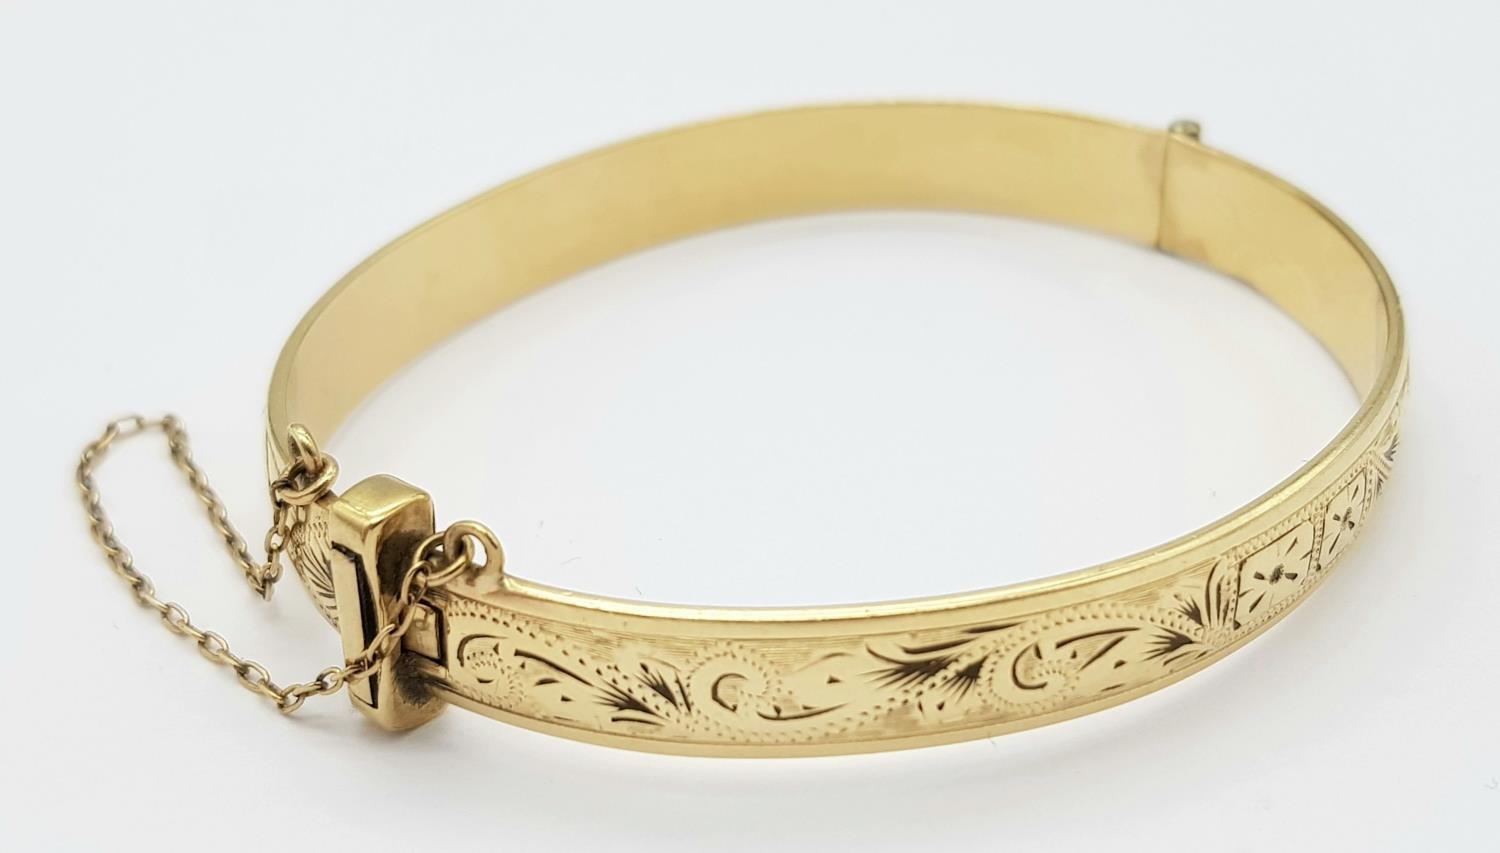 A 9K YELLOW GOLD AND METAL CORE ENGARVED BANGLE 18.3G , 53mm x 60mm diameter. ref: ADAM 9001